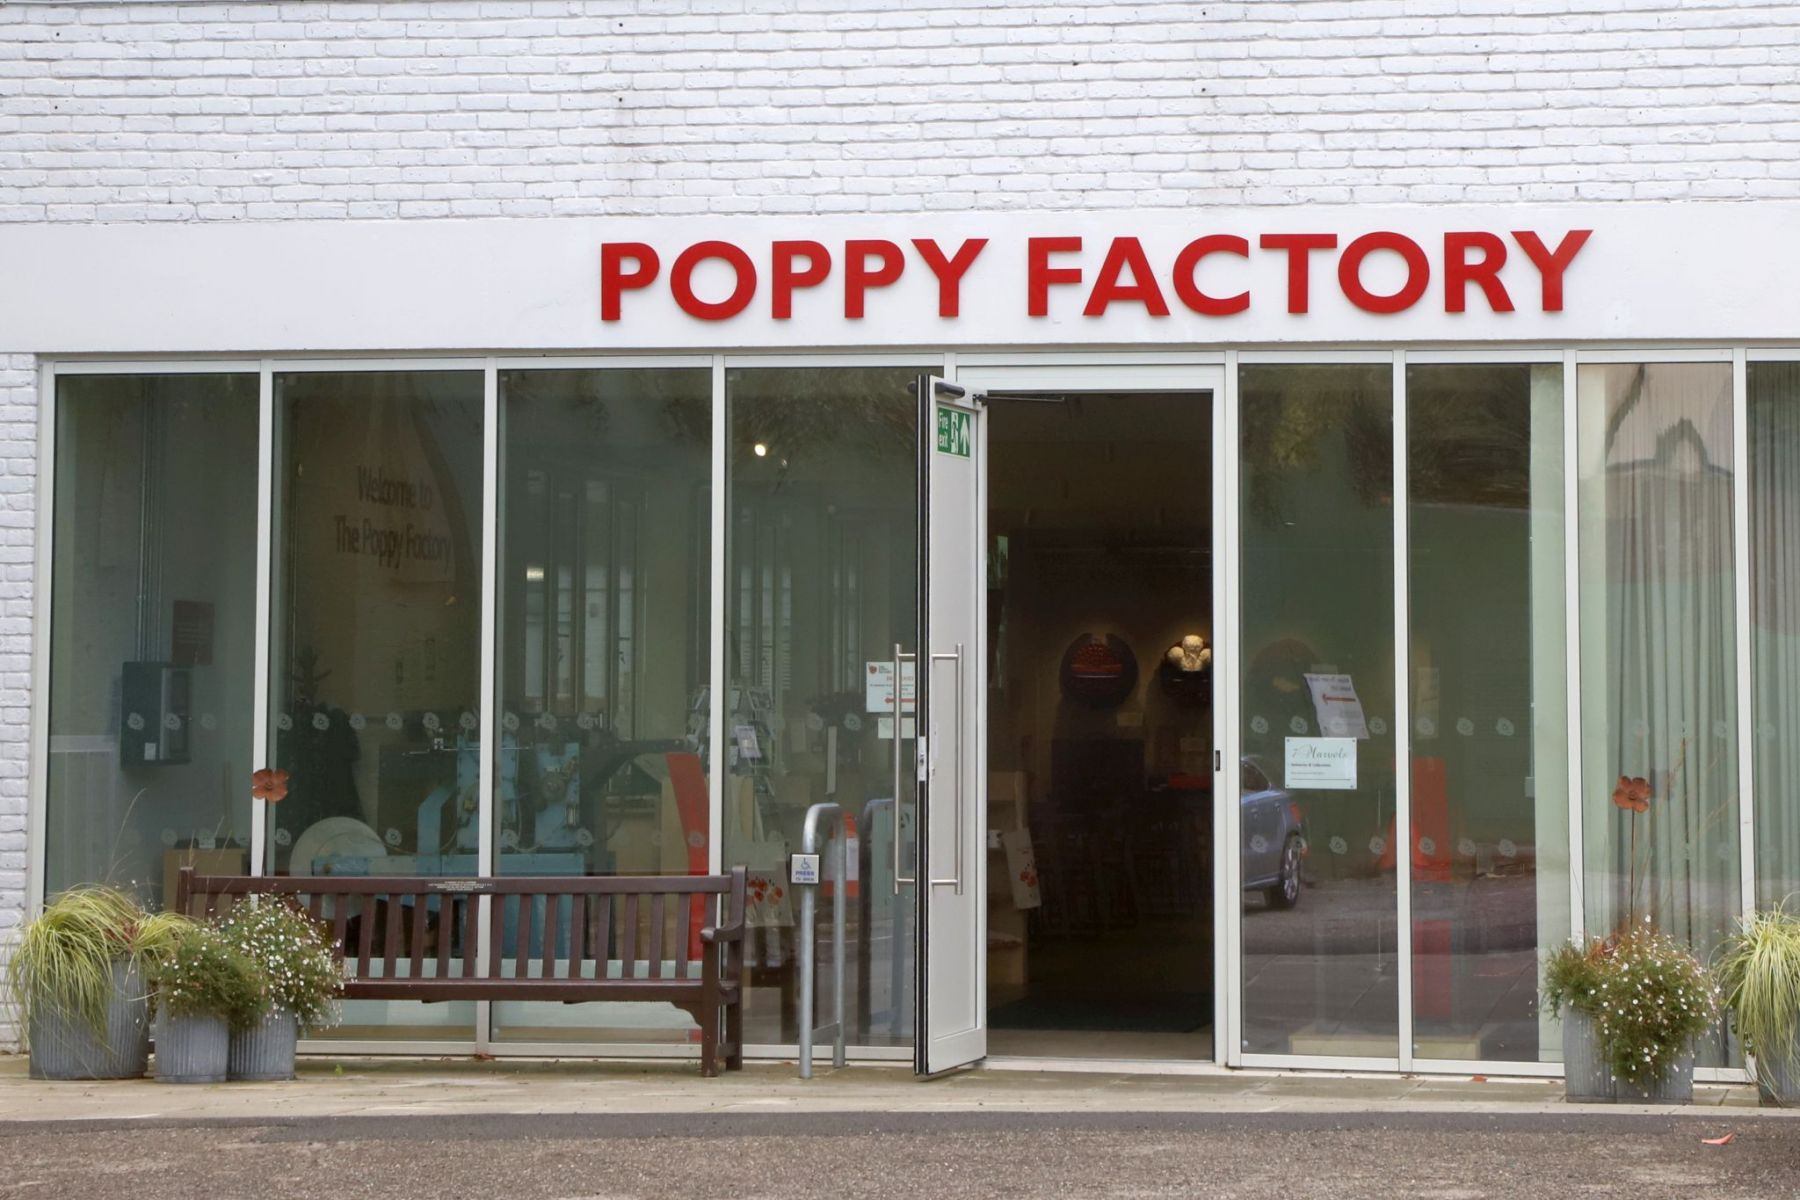 The entrance to the Poppy Factory in Richmond, SW London